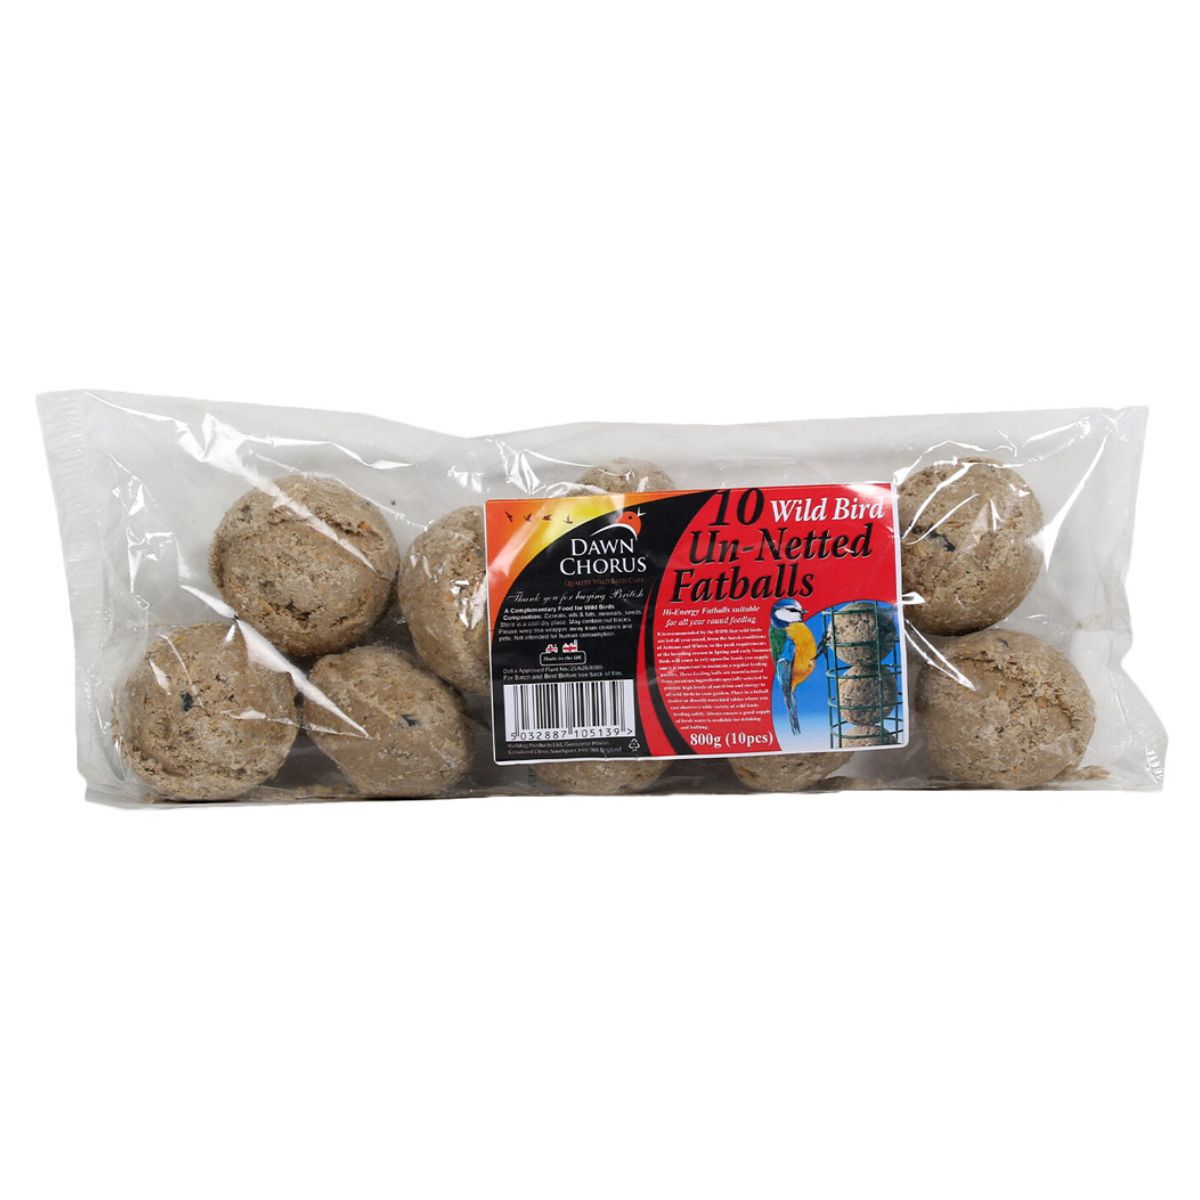 A package of Dawn Chorus - 10 Wild Bird Un Netted Fatballs - 800g on a white background.